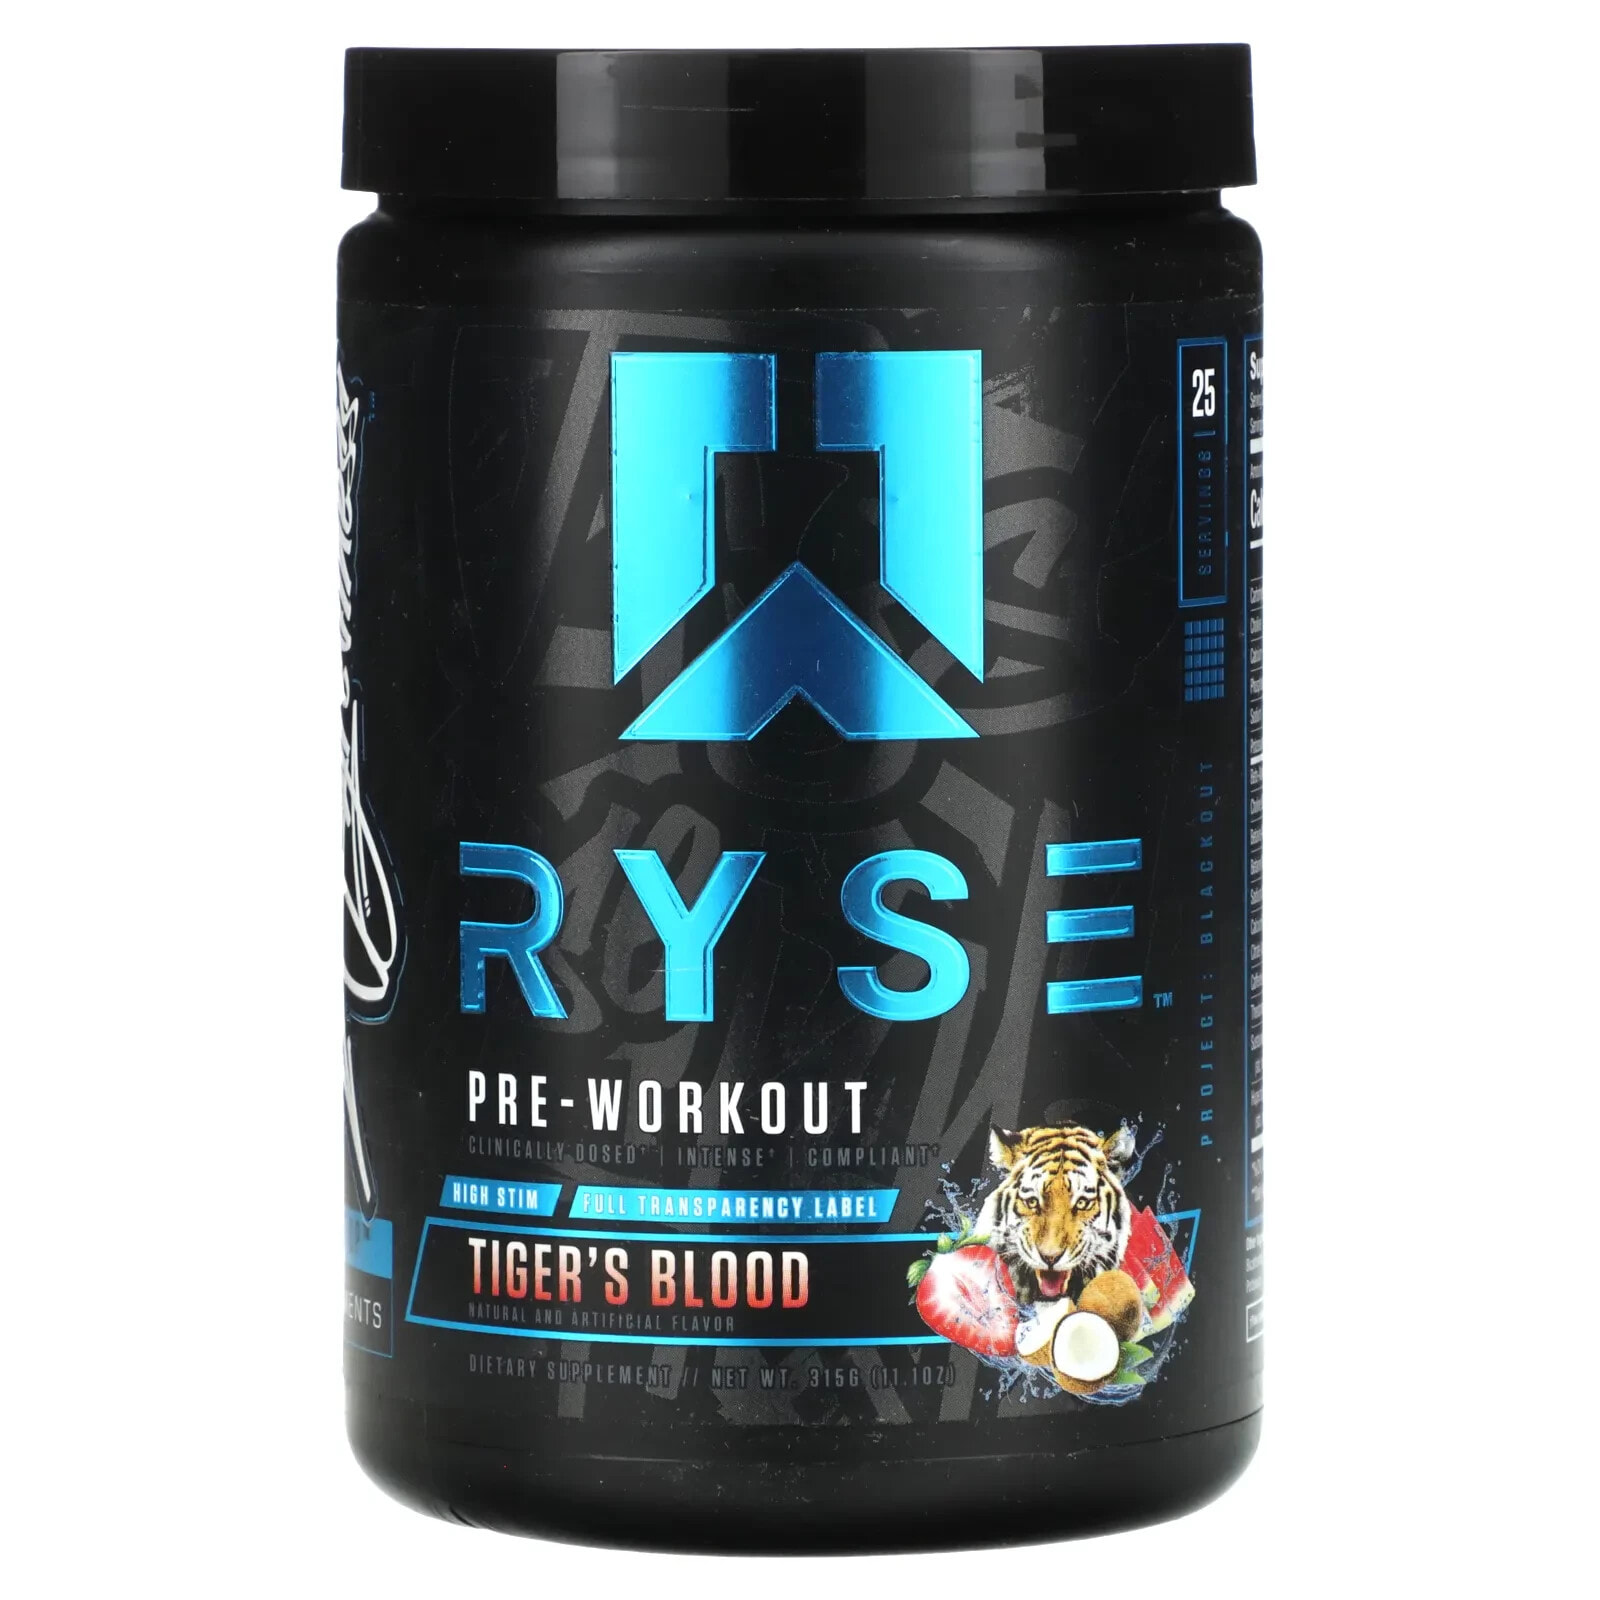 Ryse Supps, Pre-Workout, Tiger's Blood, 11.10 oz (315 g)